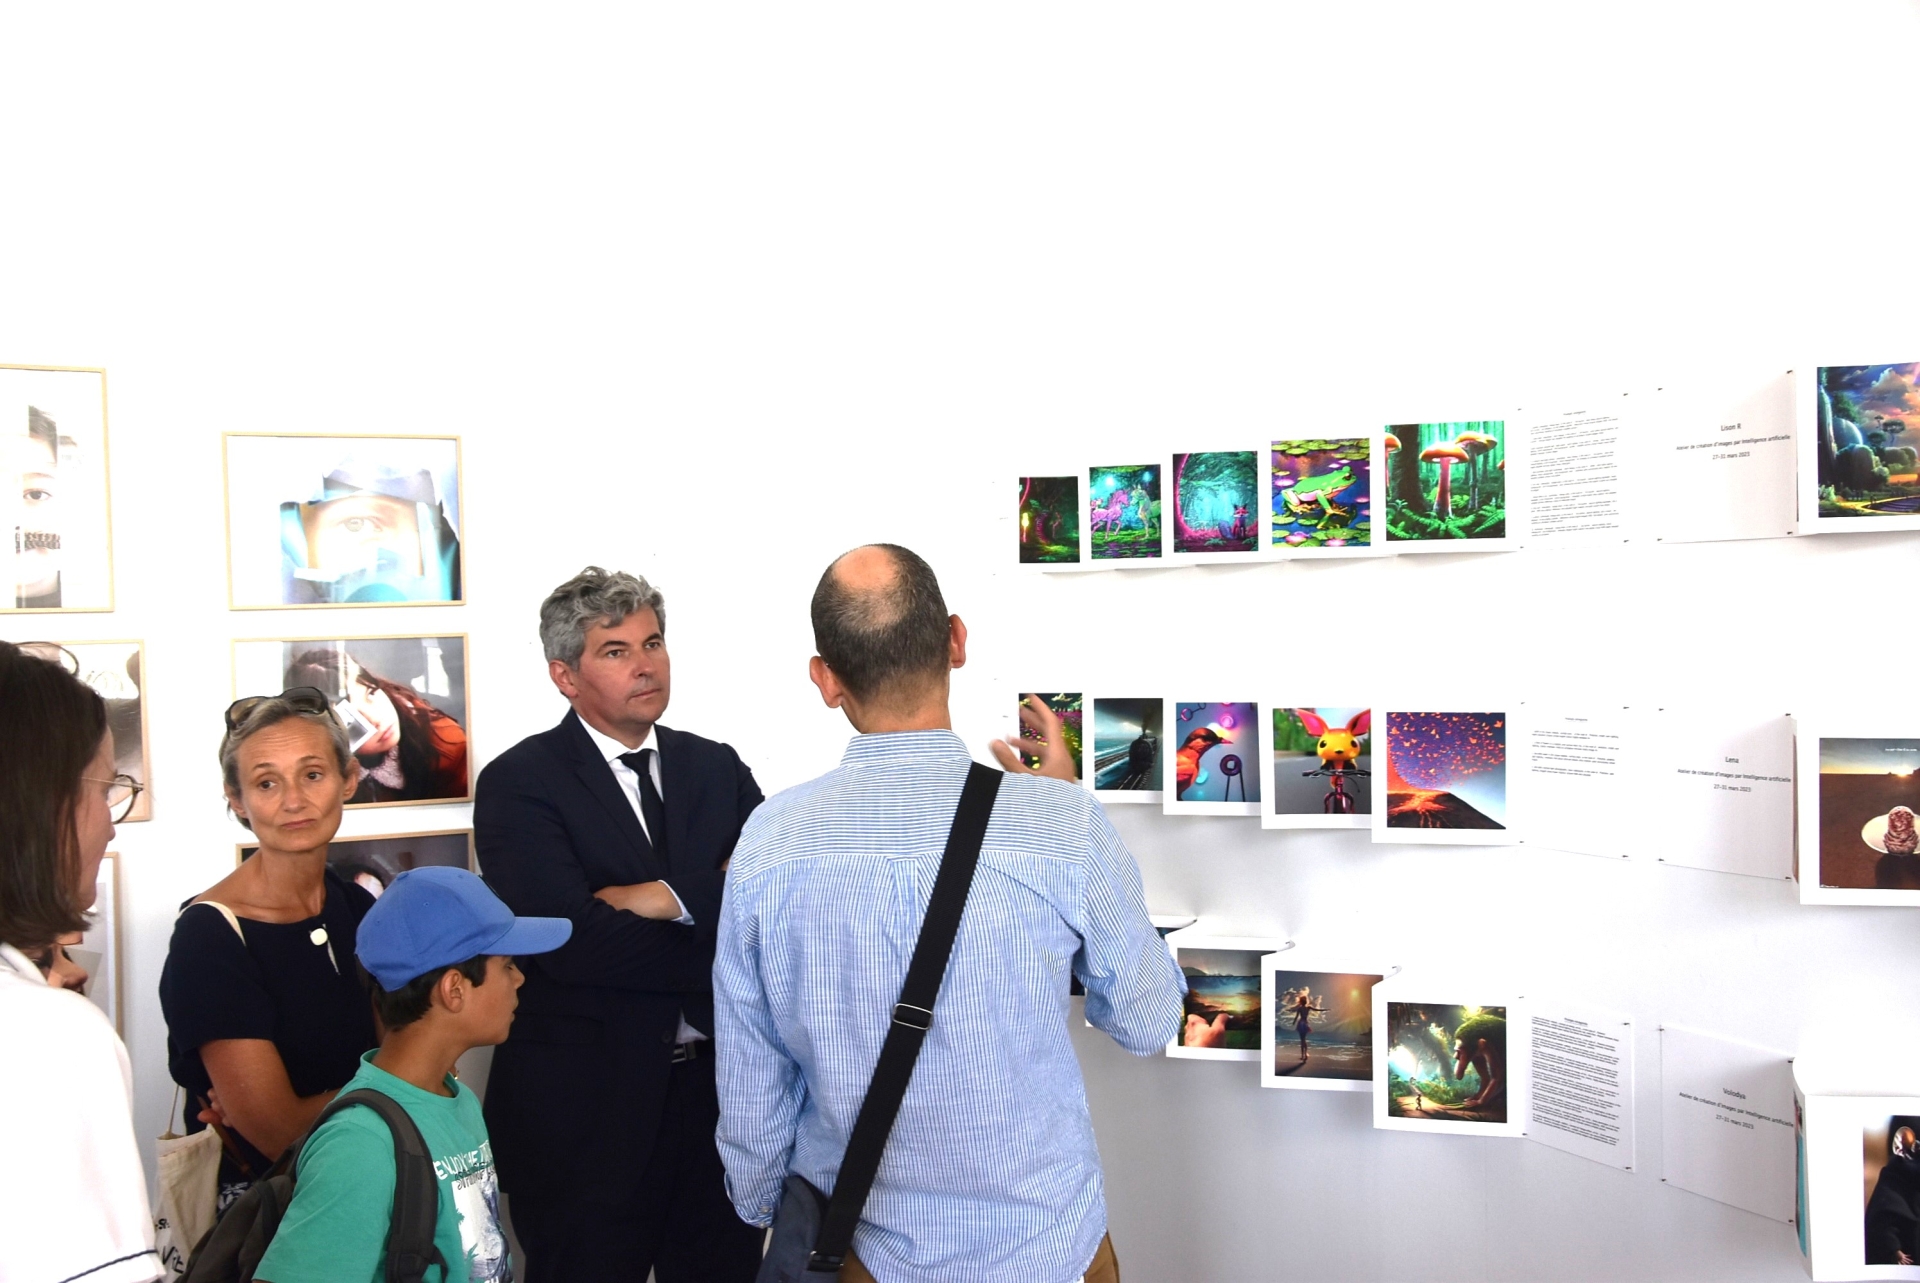 Opening at the Espace des Arts on the theme “Photography at school” – info-chalon.com